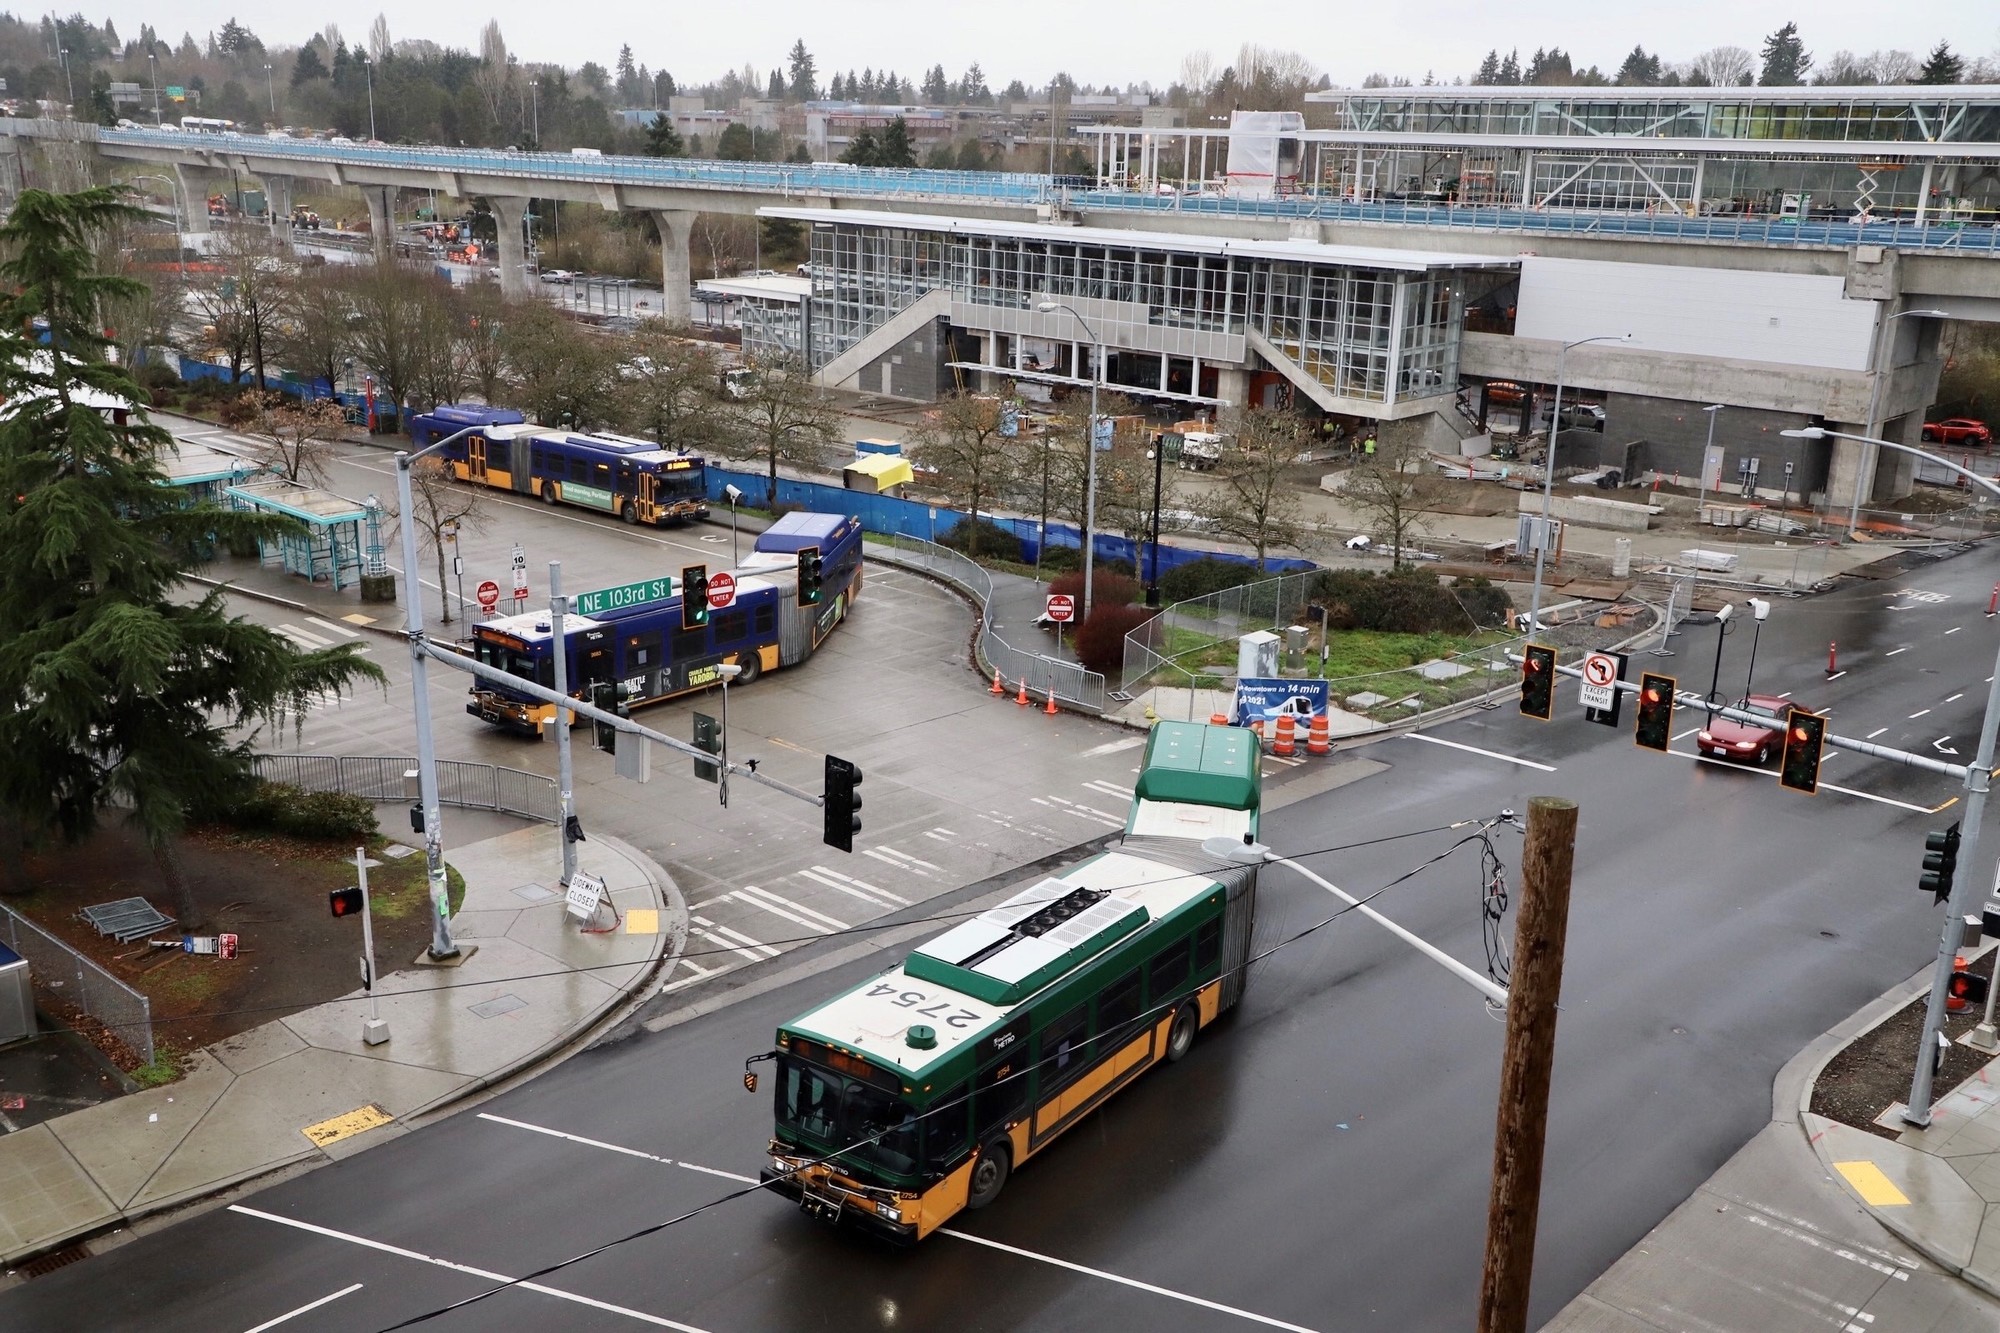 Photo of Northgate Link light rail station taken from NE 103rd Street.. There are a couple of Metro buses visible near the light rail station. 